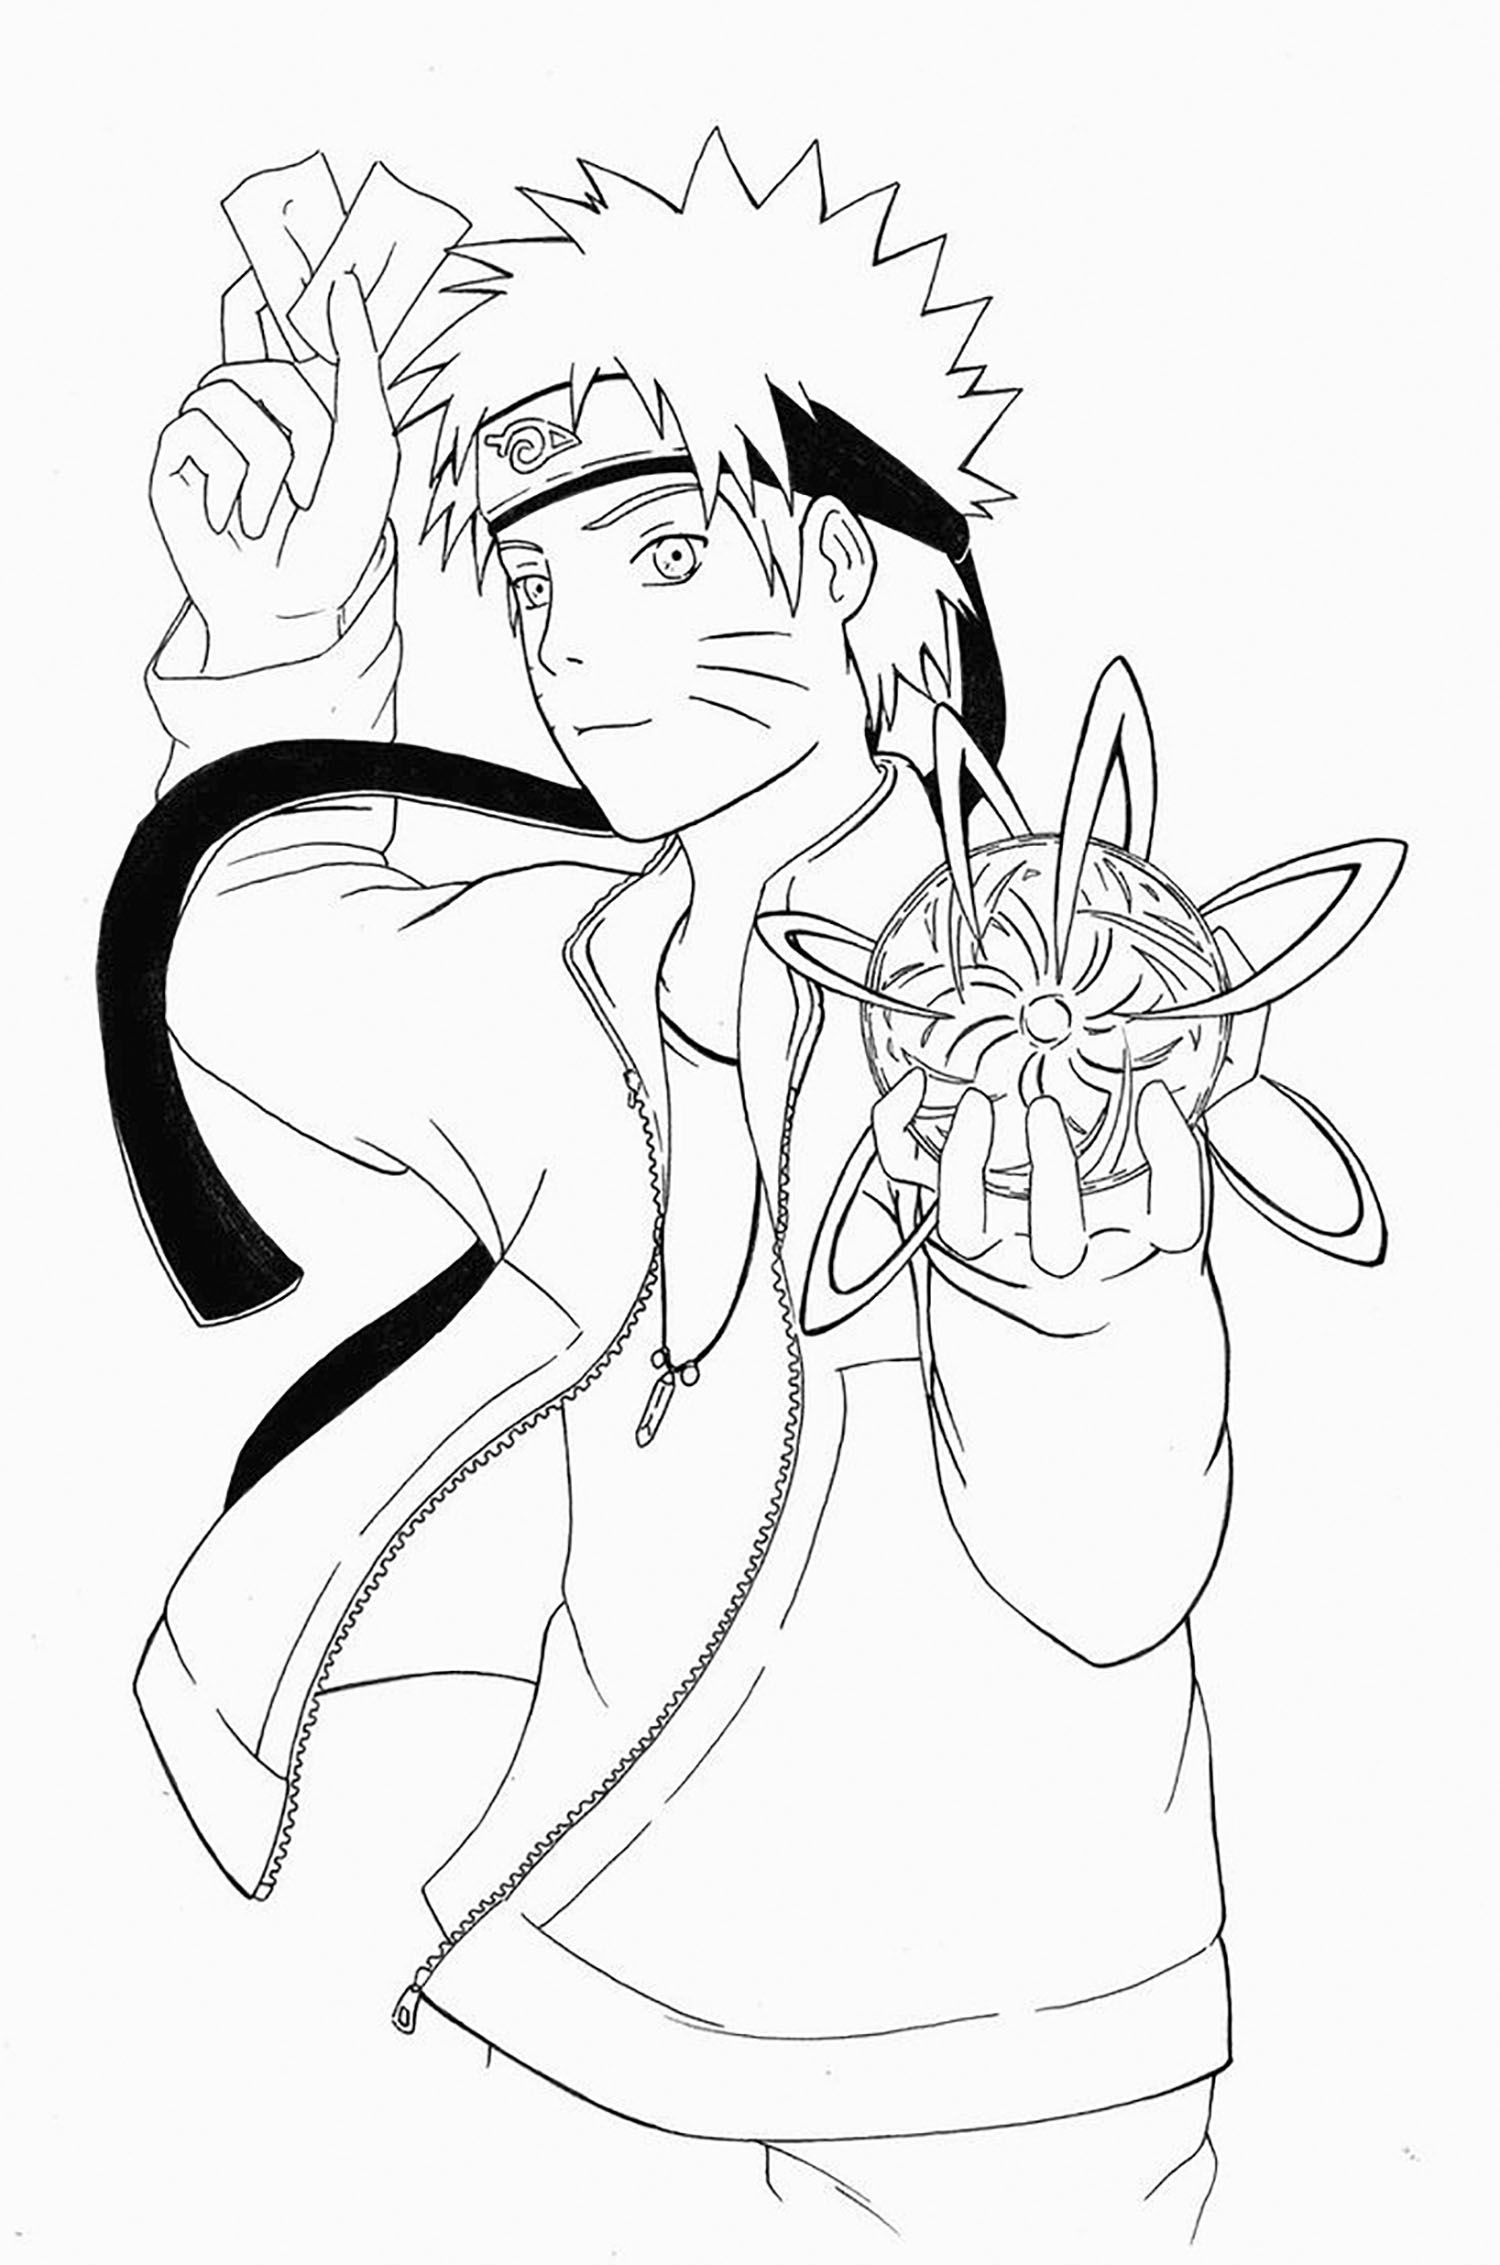 Naruto to download for free - Naruto Kids Coloring Pages